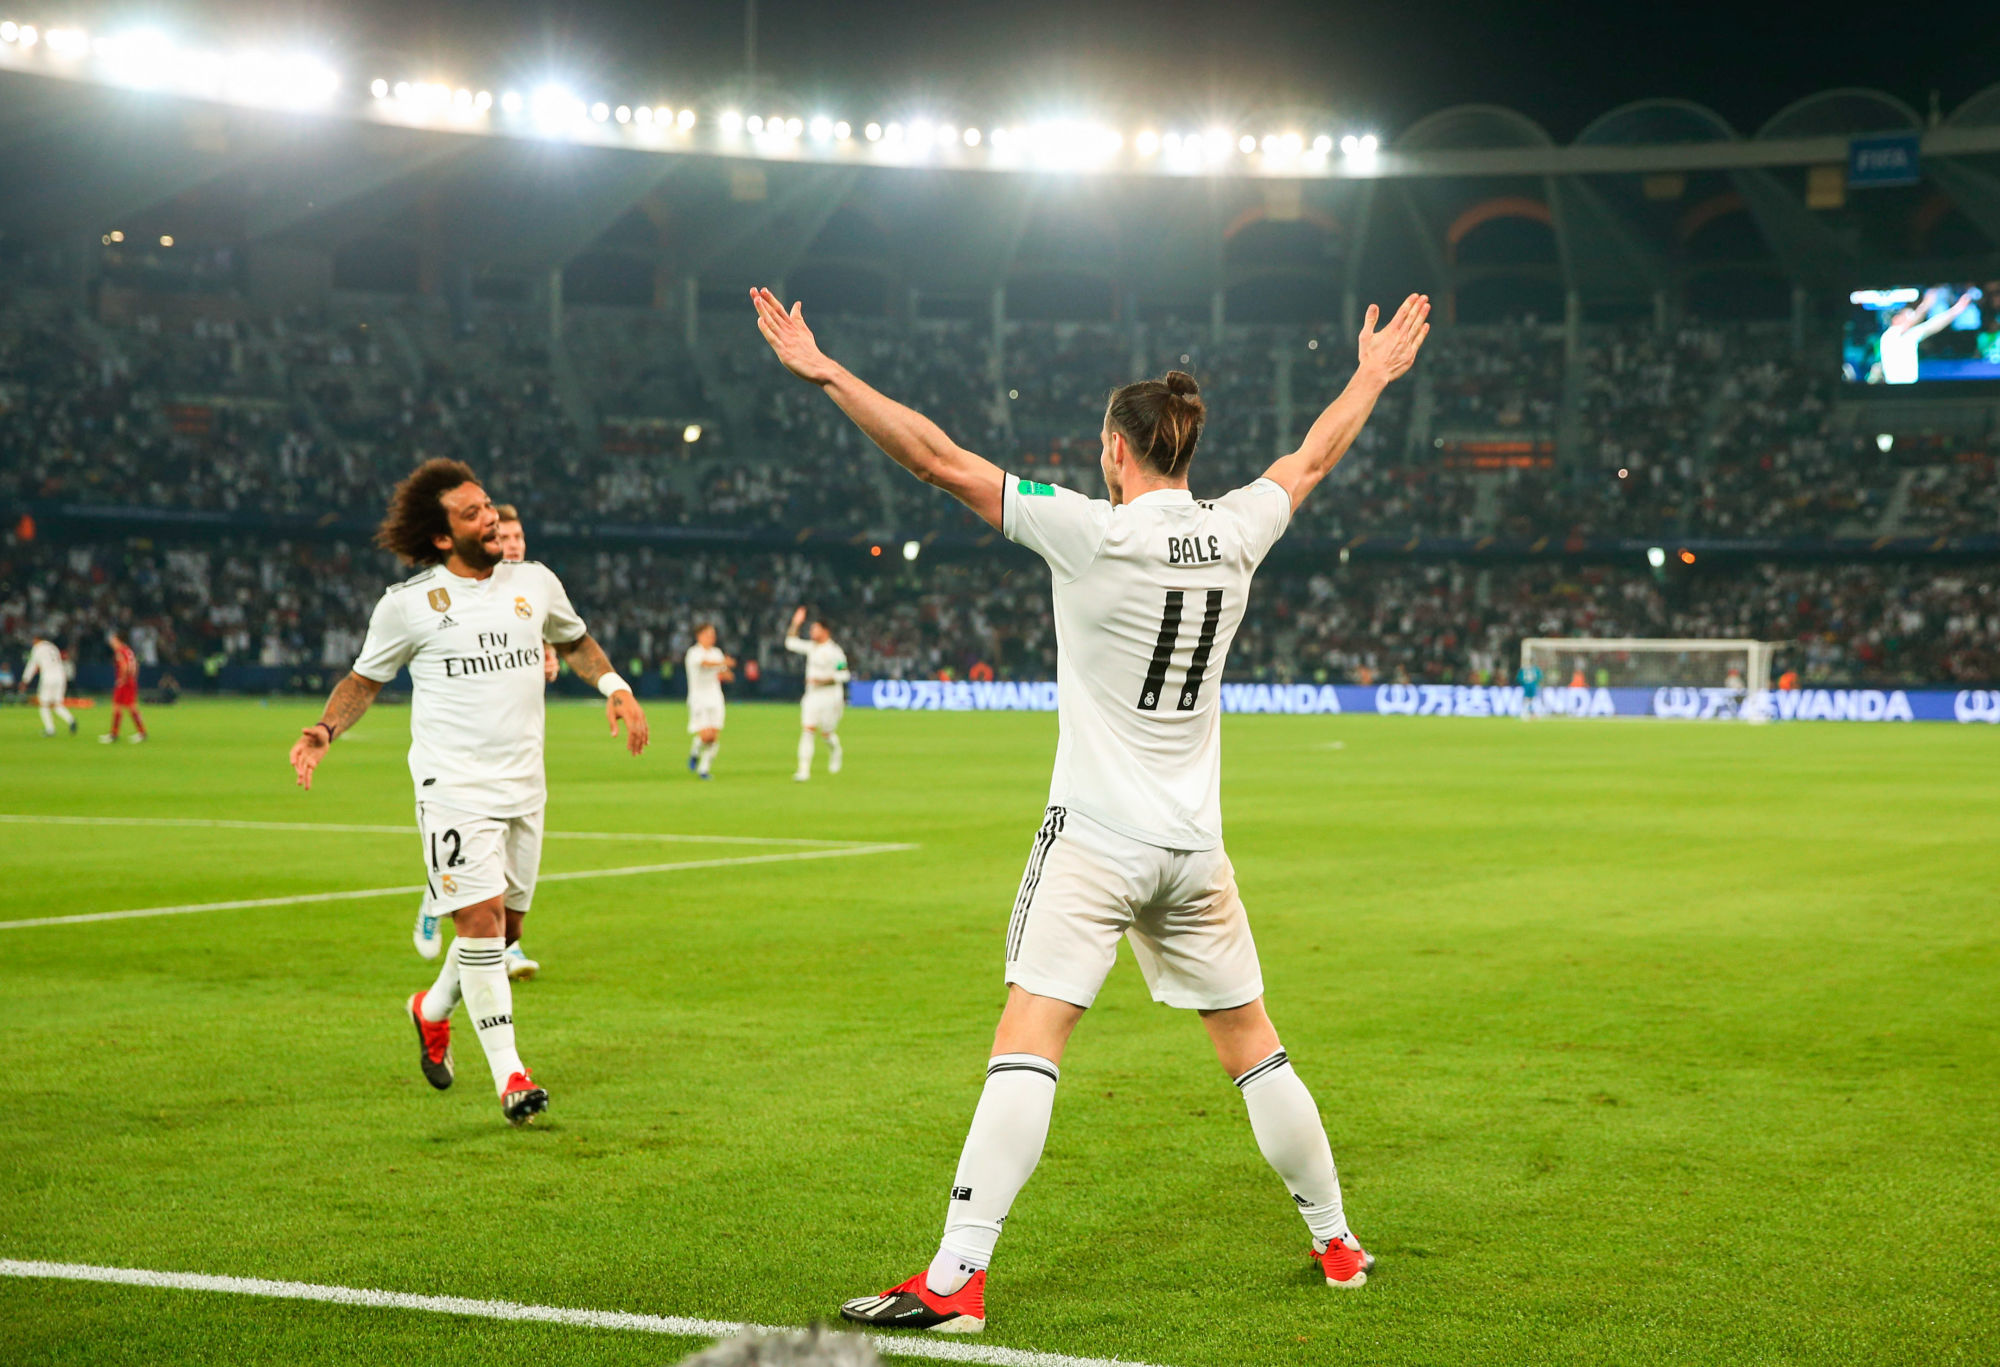 Gareth Bale celebrates his goal with Marcelo during the FIFA Club World Cup match between  Kashima Antlers and Real Madrid in Abu Dhabi on December 19th, 2018. 
Photo : Marca / Icon Sport